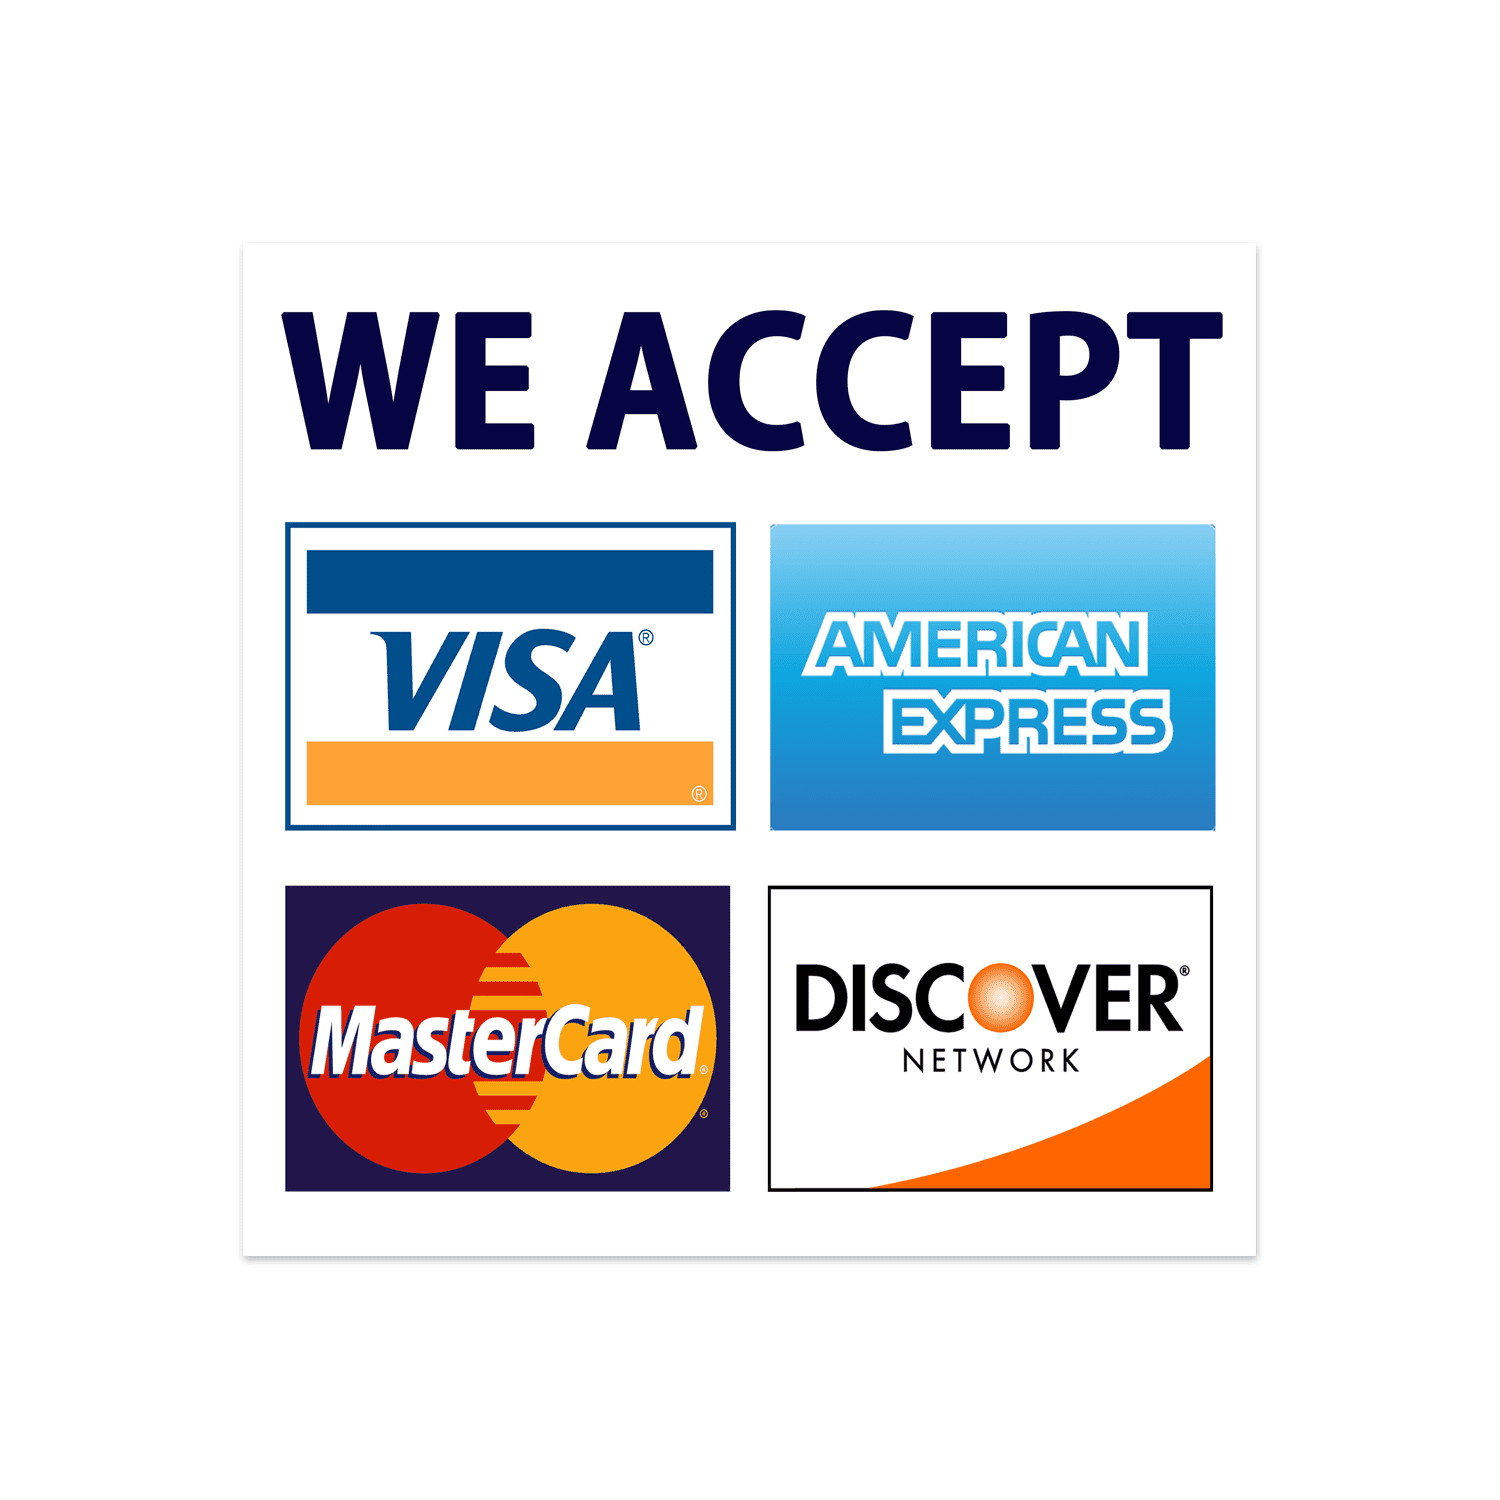 Sign Adhesive Sticker Notice All Credit & Debit Cards Accepted Visa MasterCard*